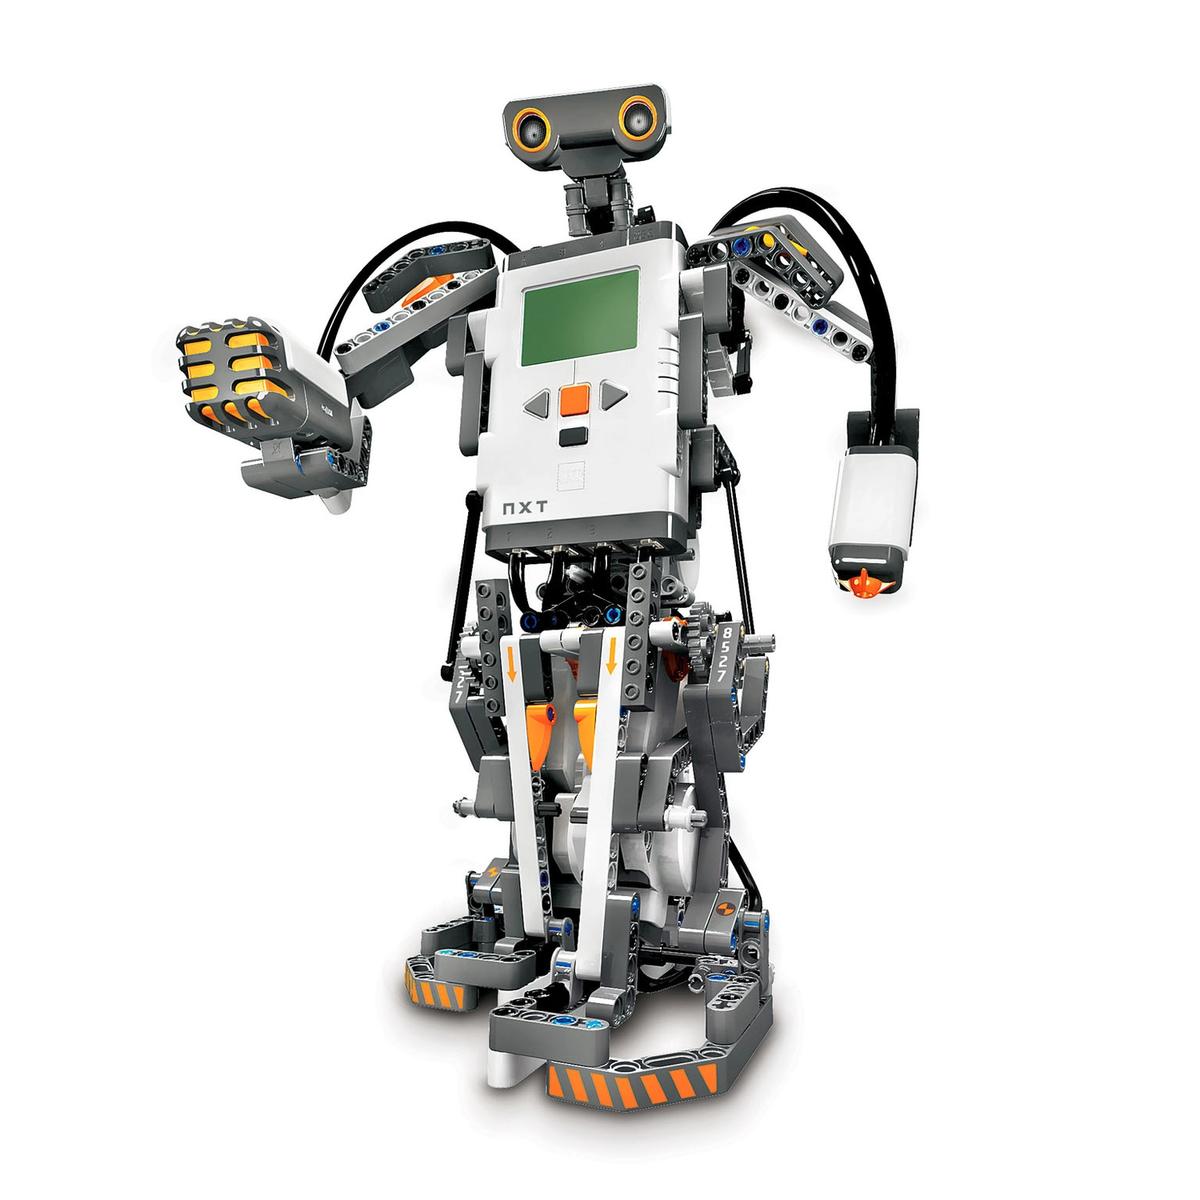 Lego Mindstorms NXT - ROBOTS: Your Guide to the World of Robotics